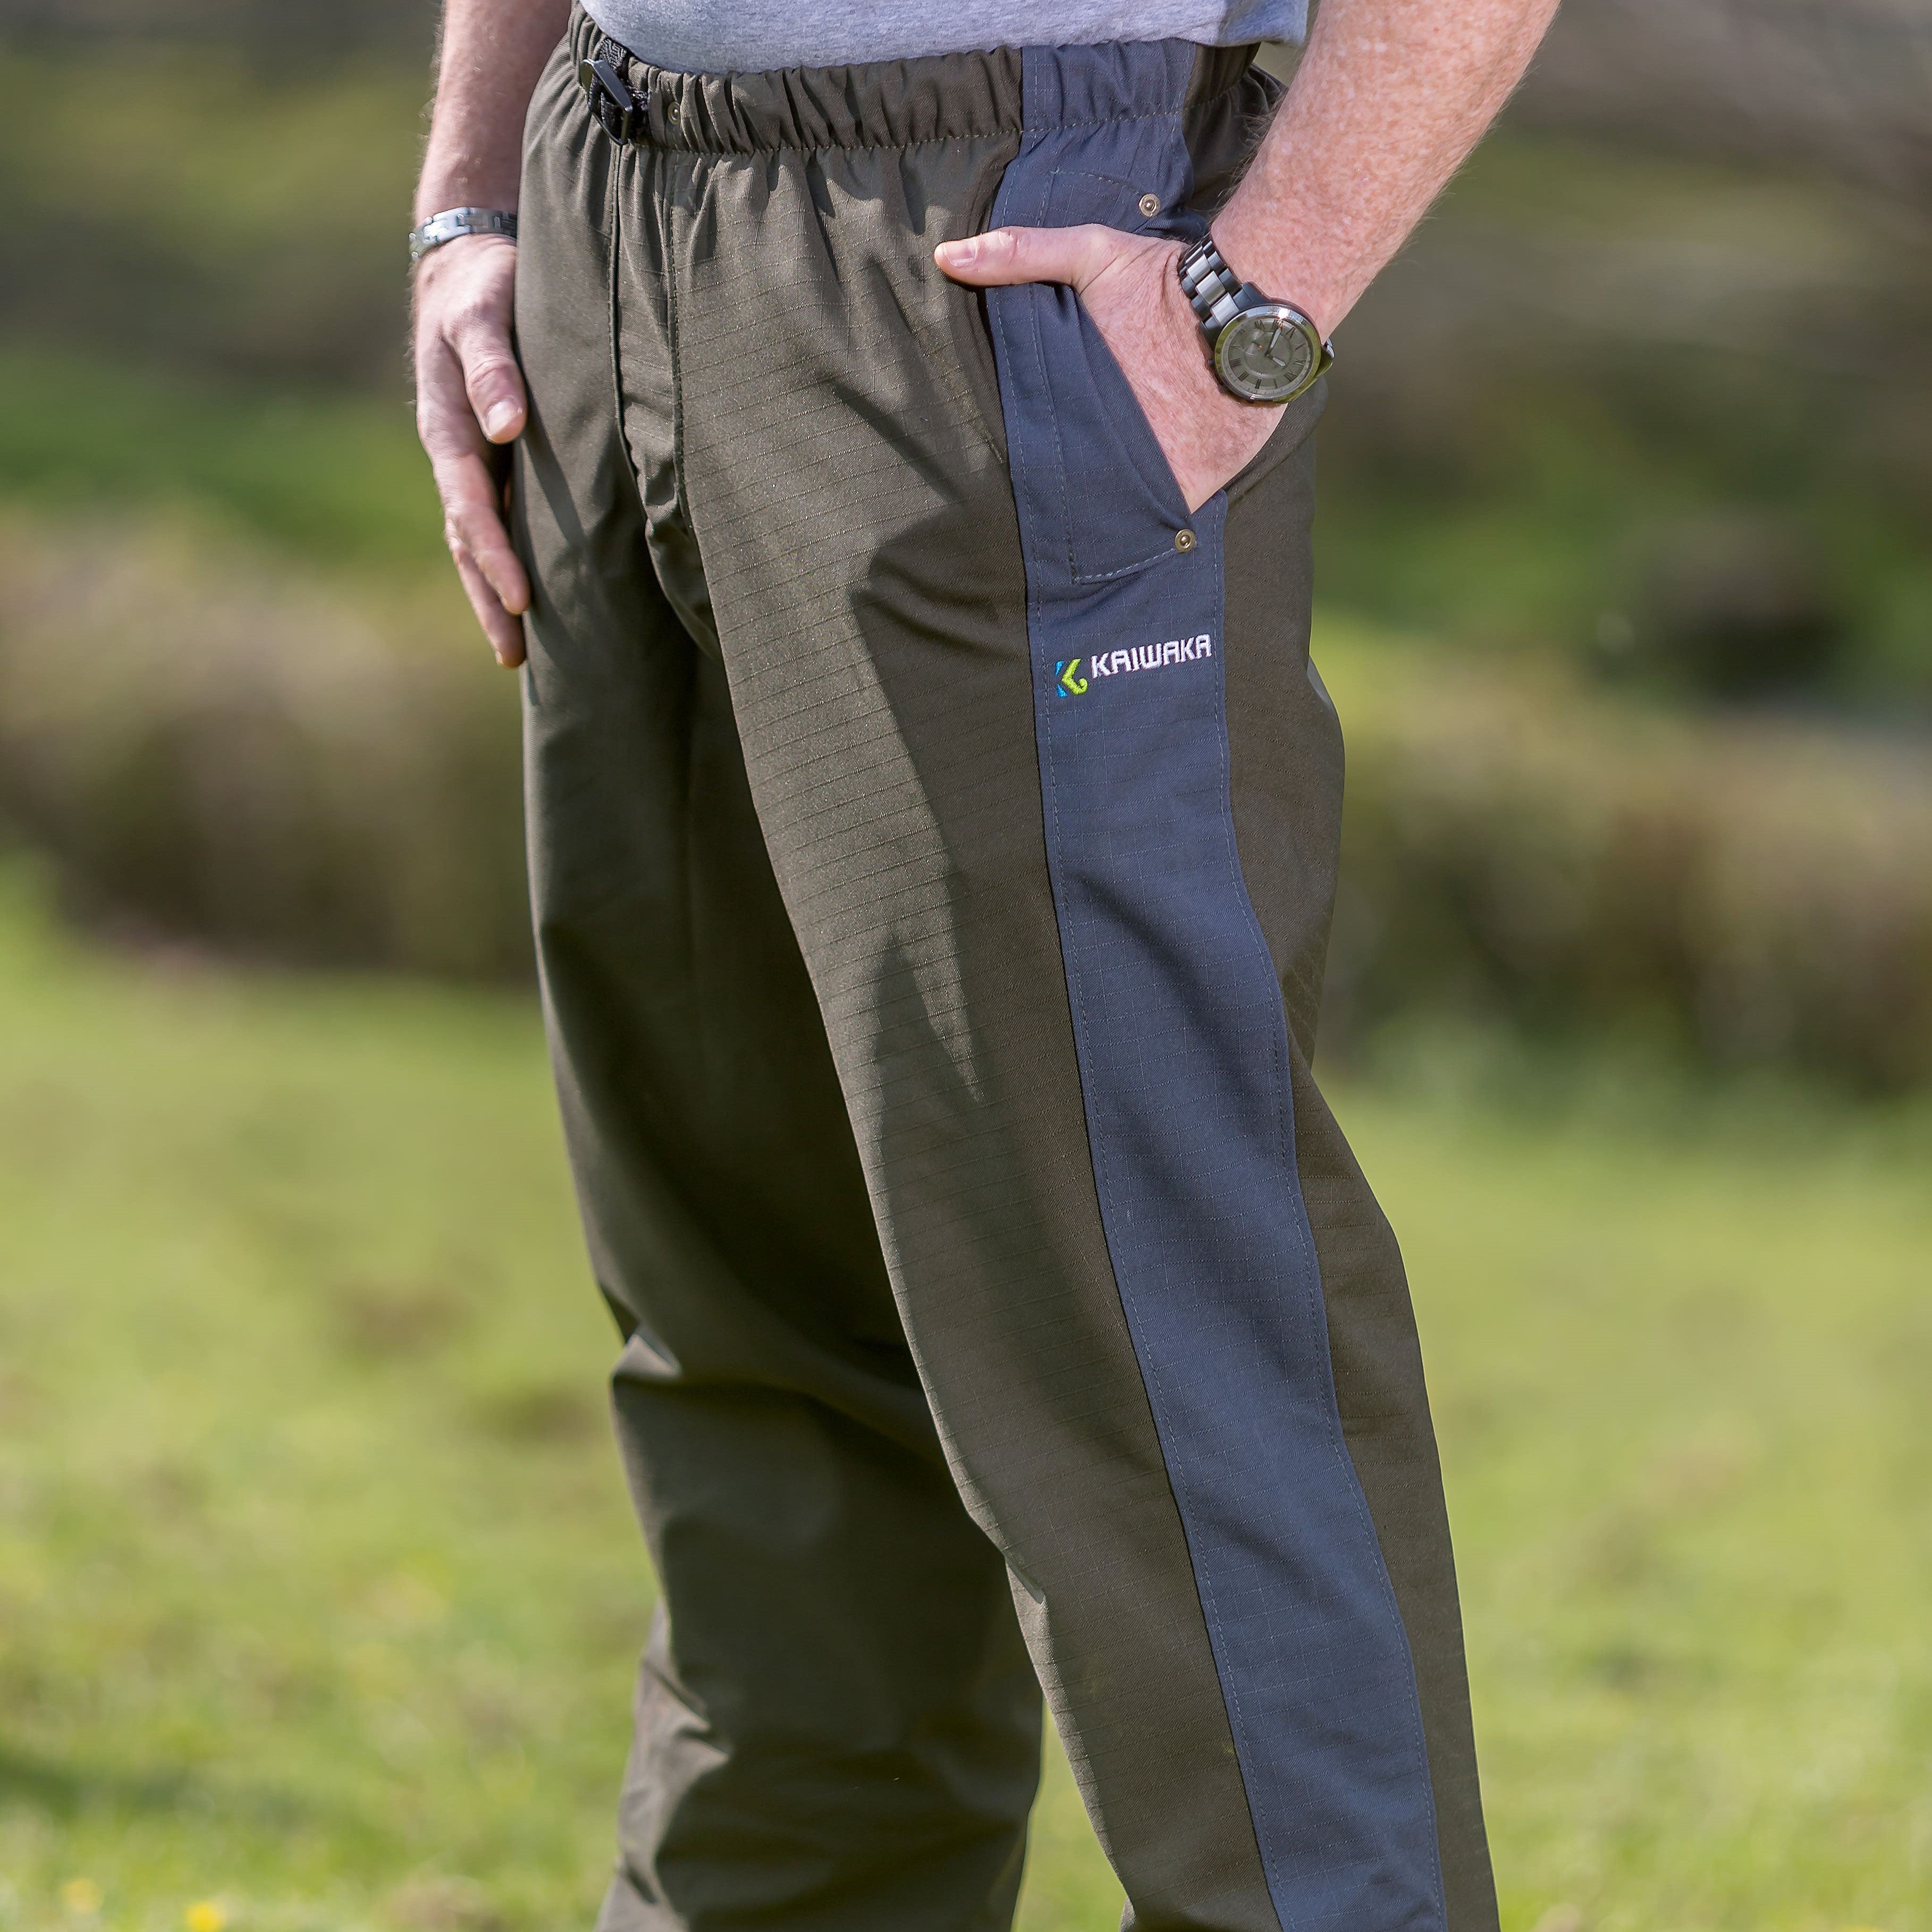 Men's Waterproof Trousers and Overtrousers for Walking